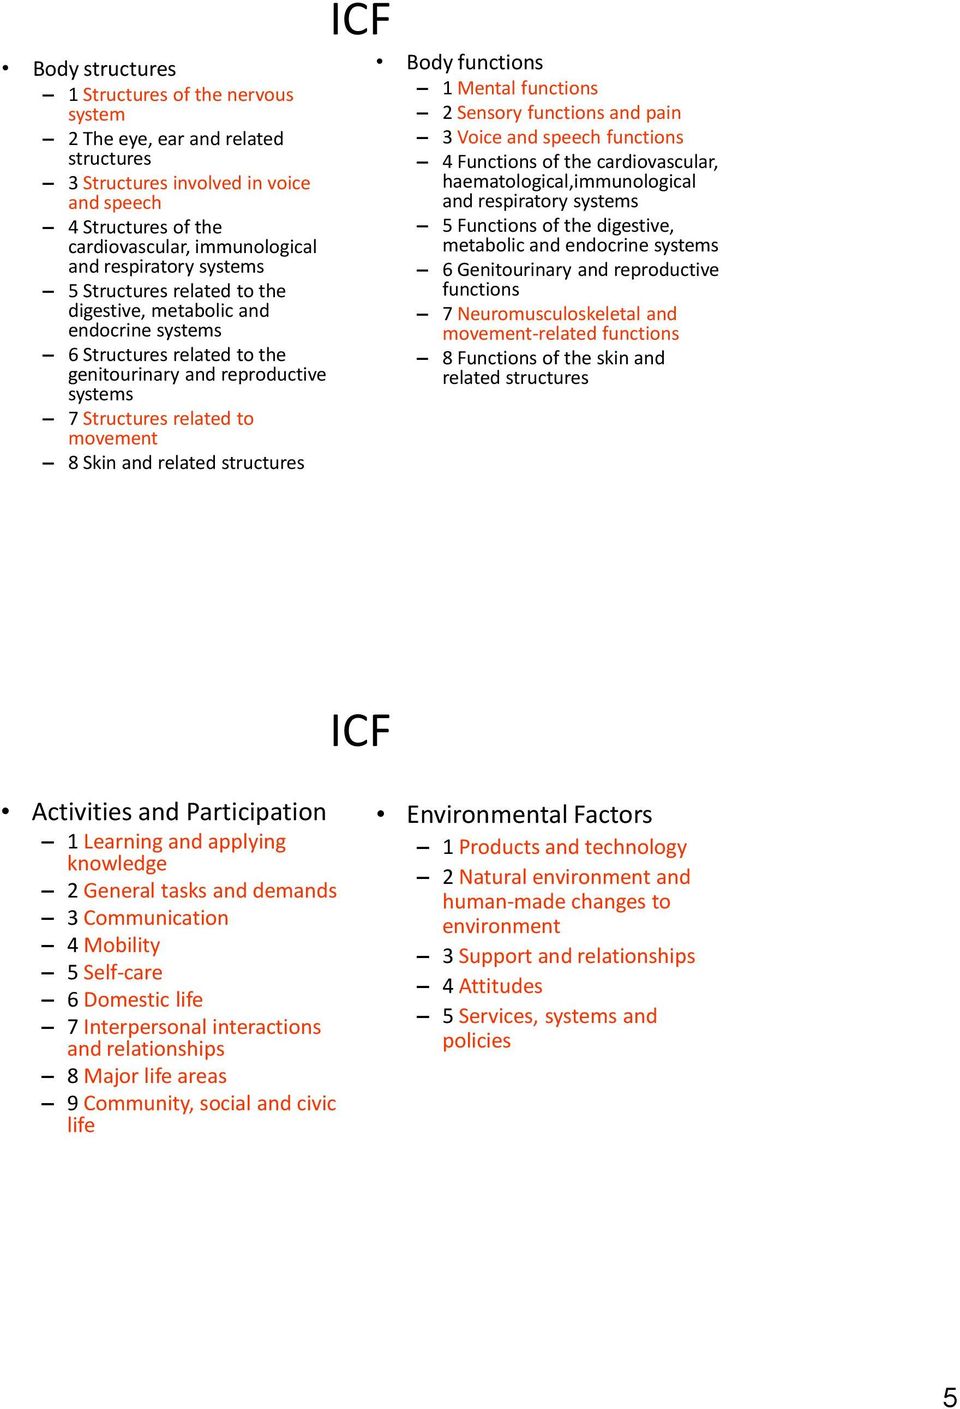 structures ICF Body functions 1 Mental functions 2 Sensory functions and pain 3 Voice and speech functions 4 Functions of the cardiovascular, haematological,immunological and respiratory systems 5